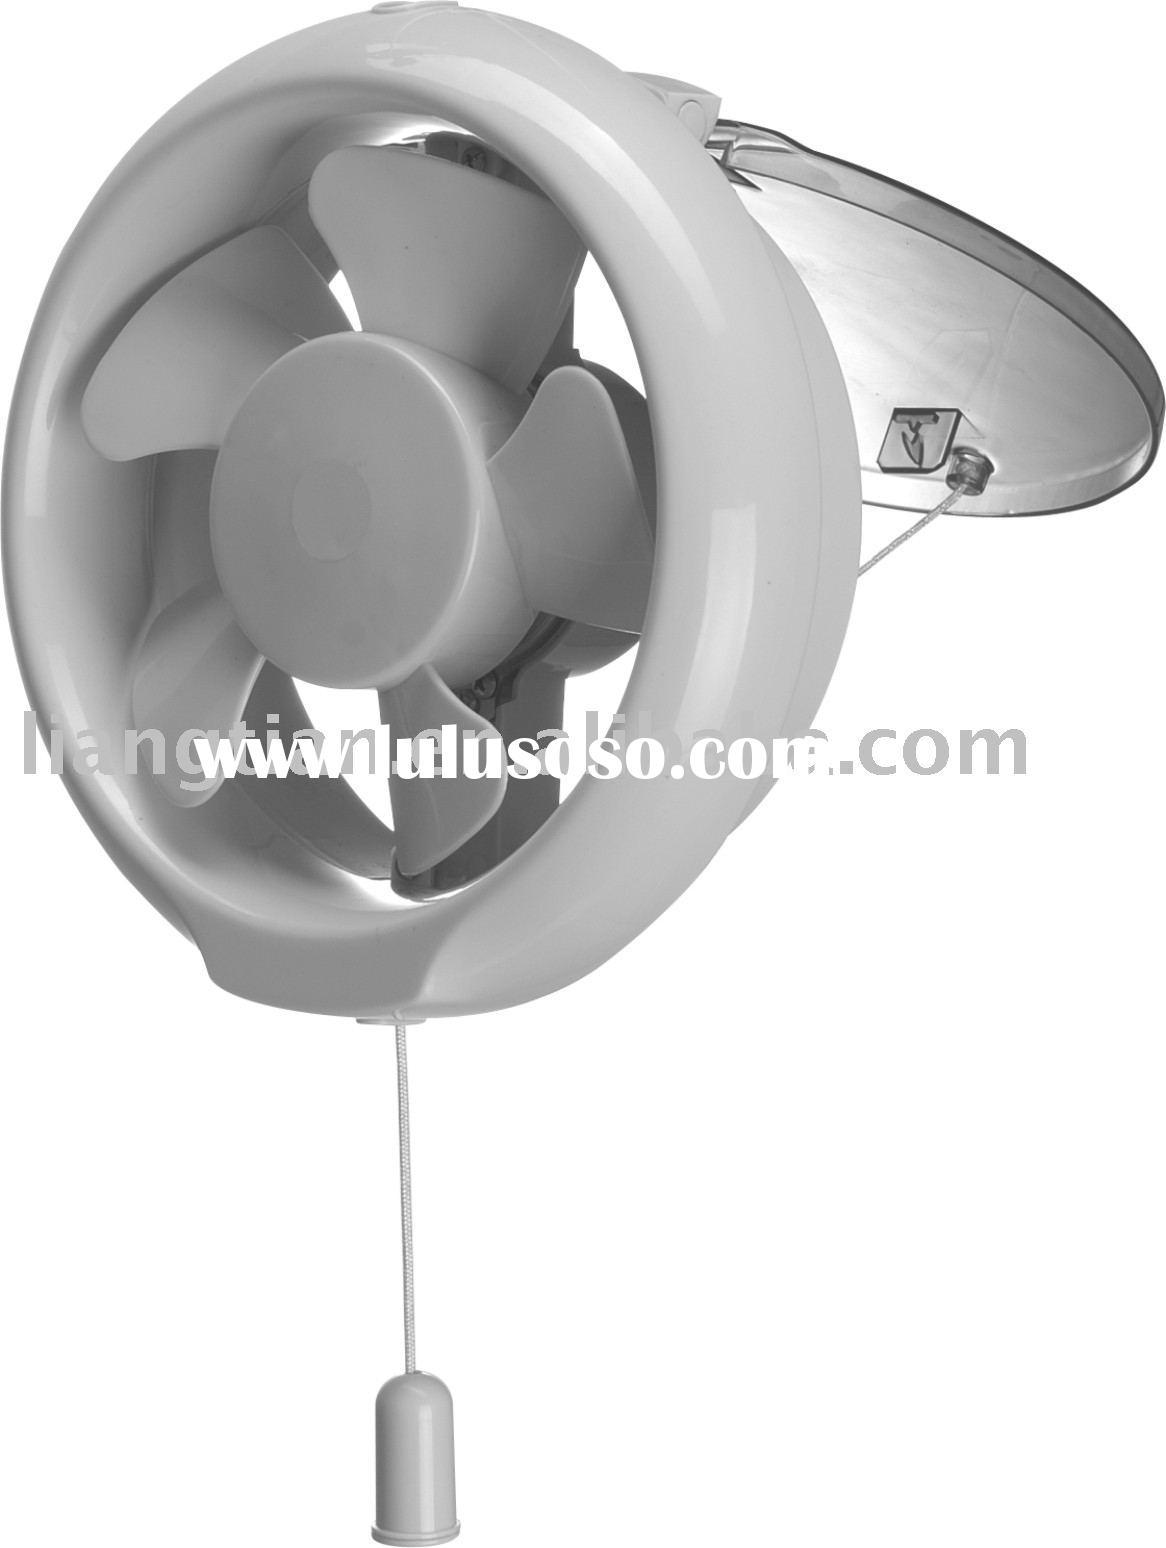 Home Exhaust Fan For Cigarette Smoke Tafertelons48s Soup with regard to proportions 1166 X 1548